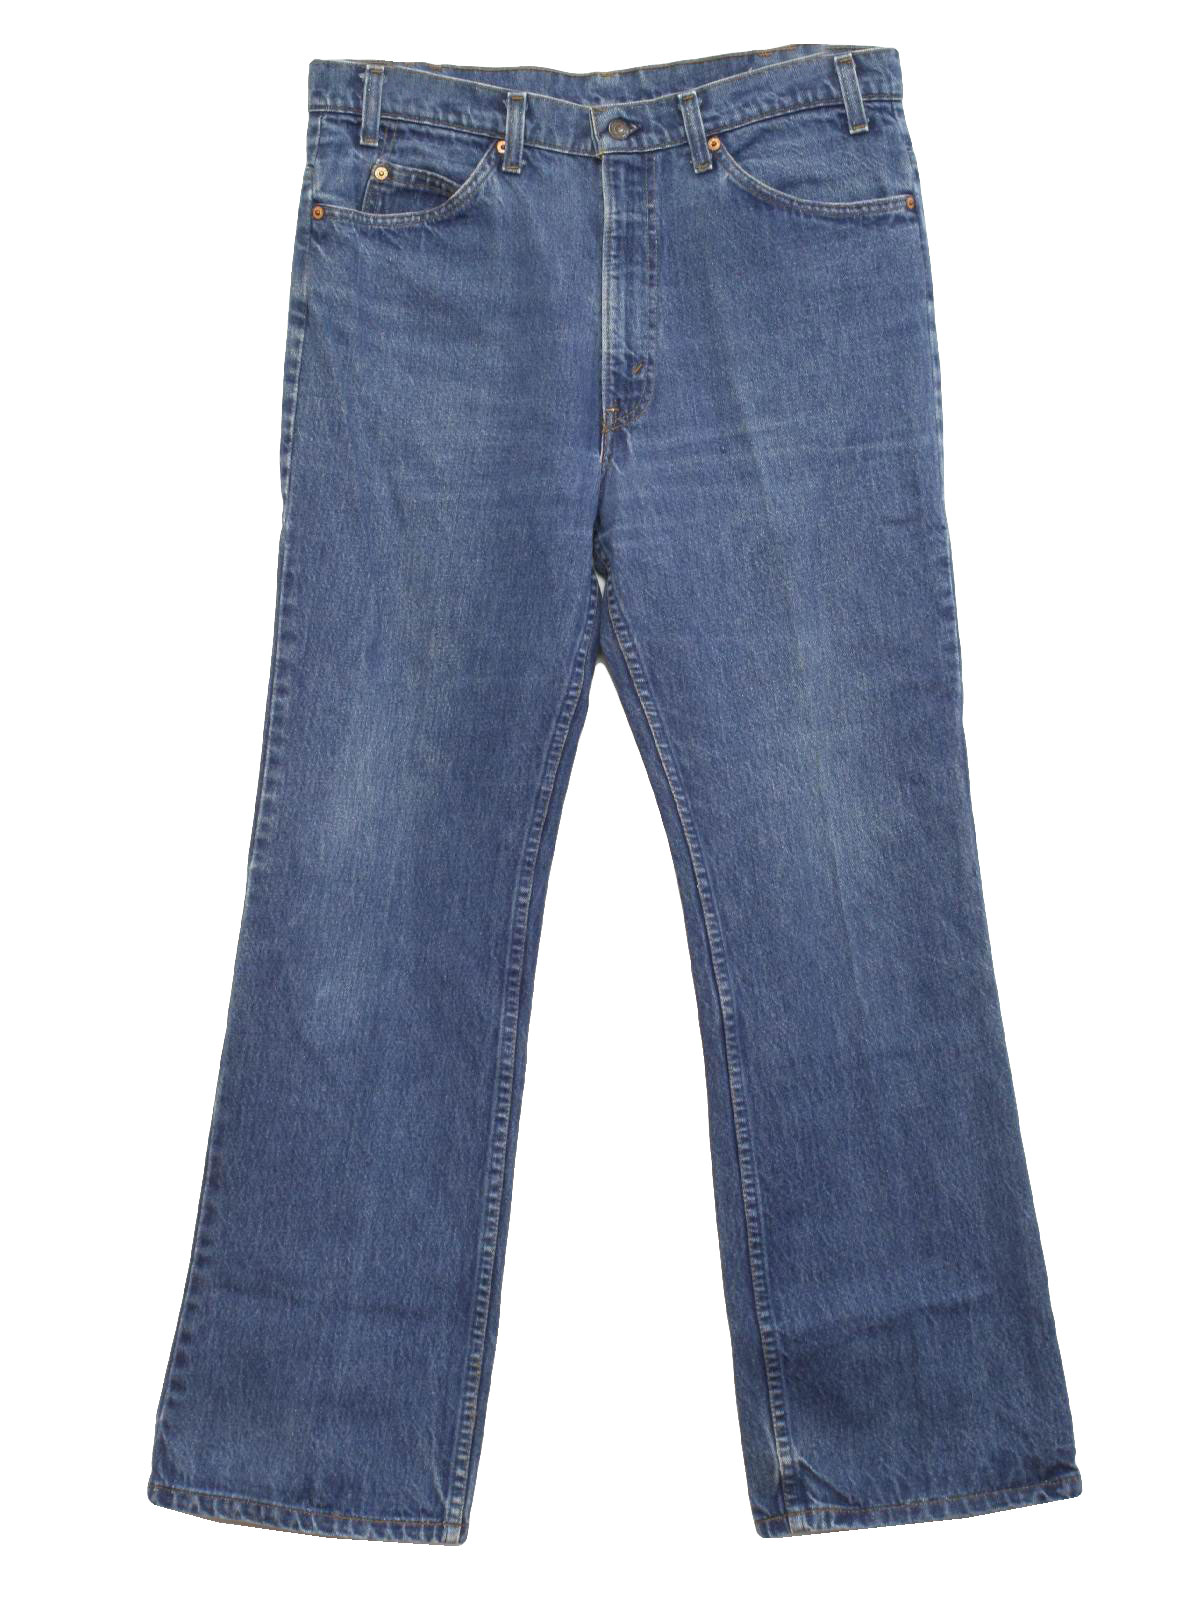 Seventies Vintage Flared Pants / Flares: 70s -Levis- Mens faded blue ...